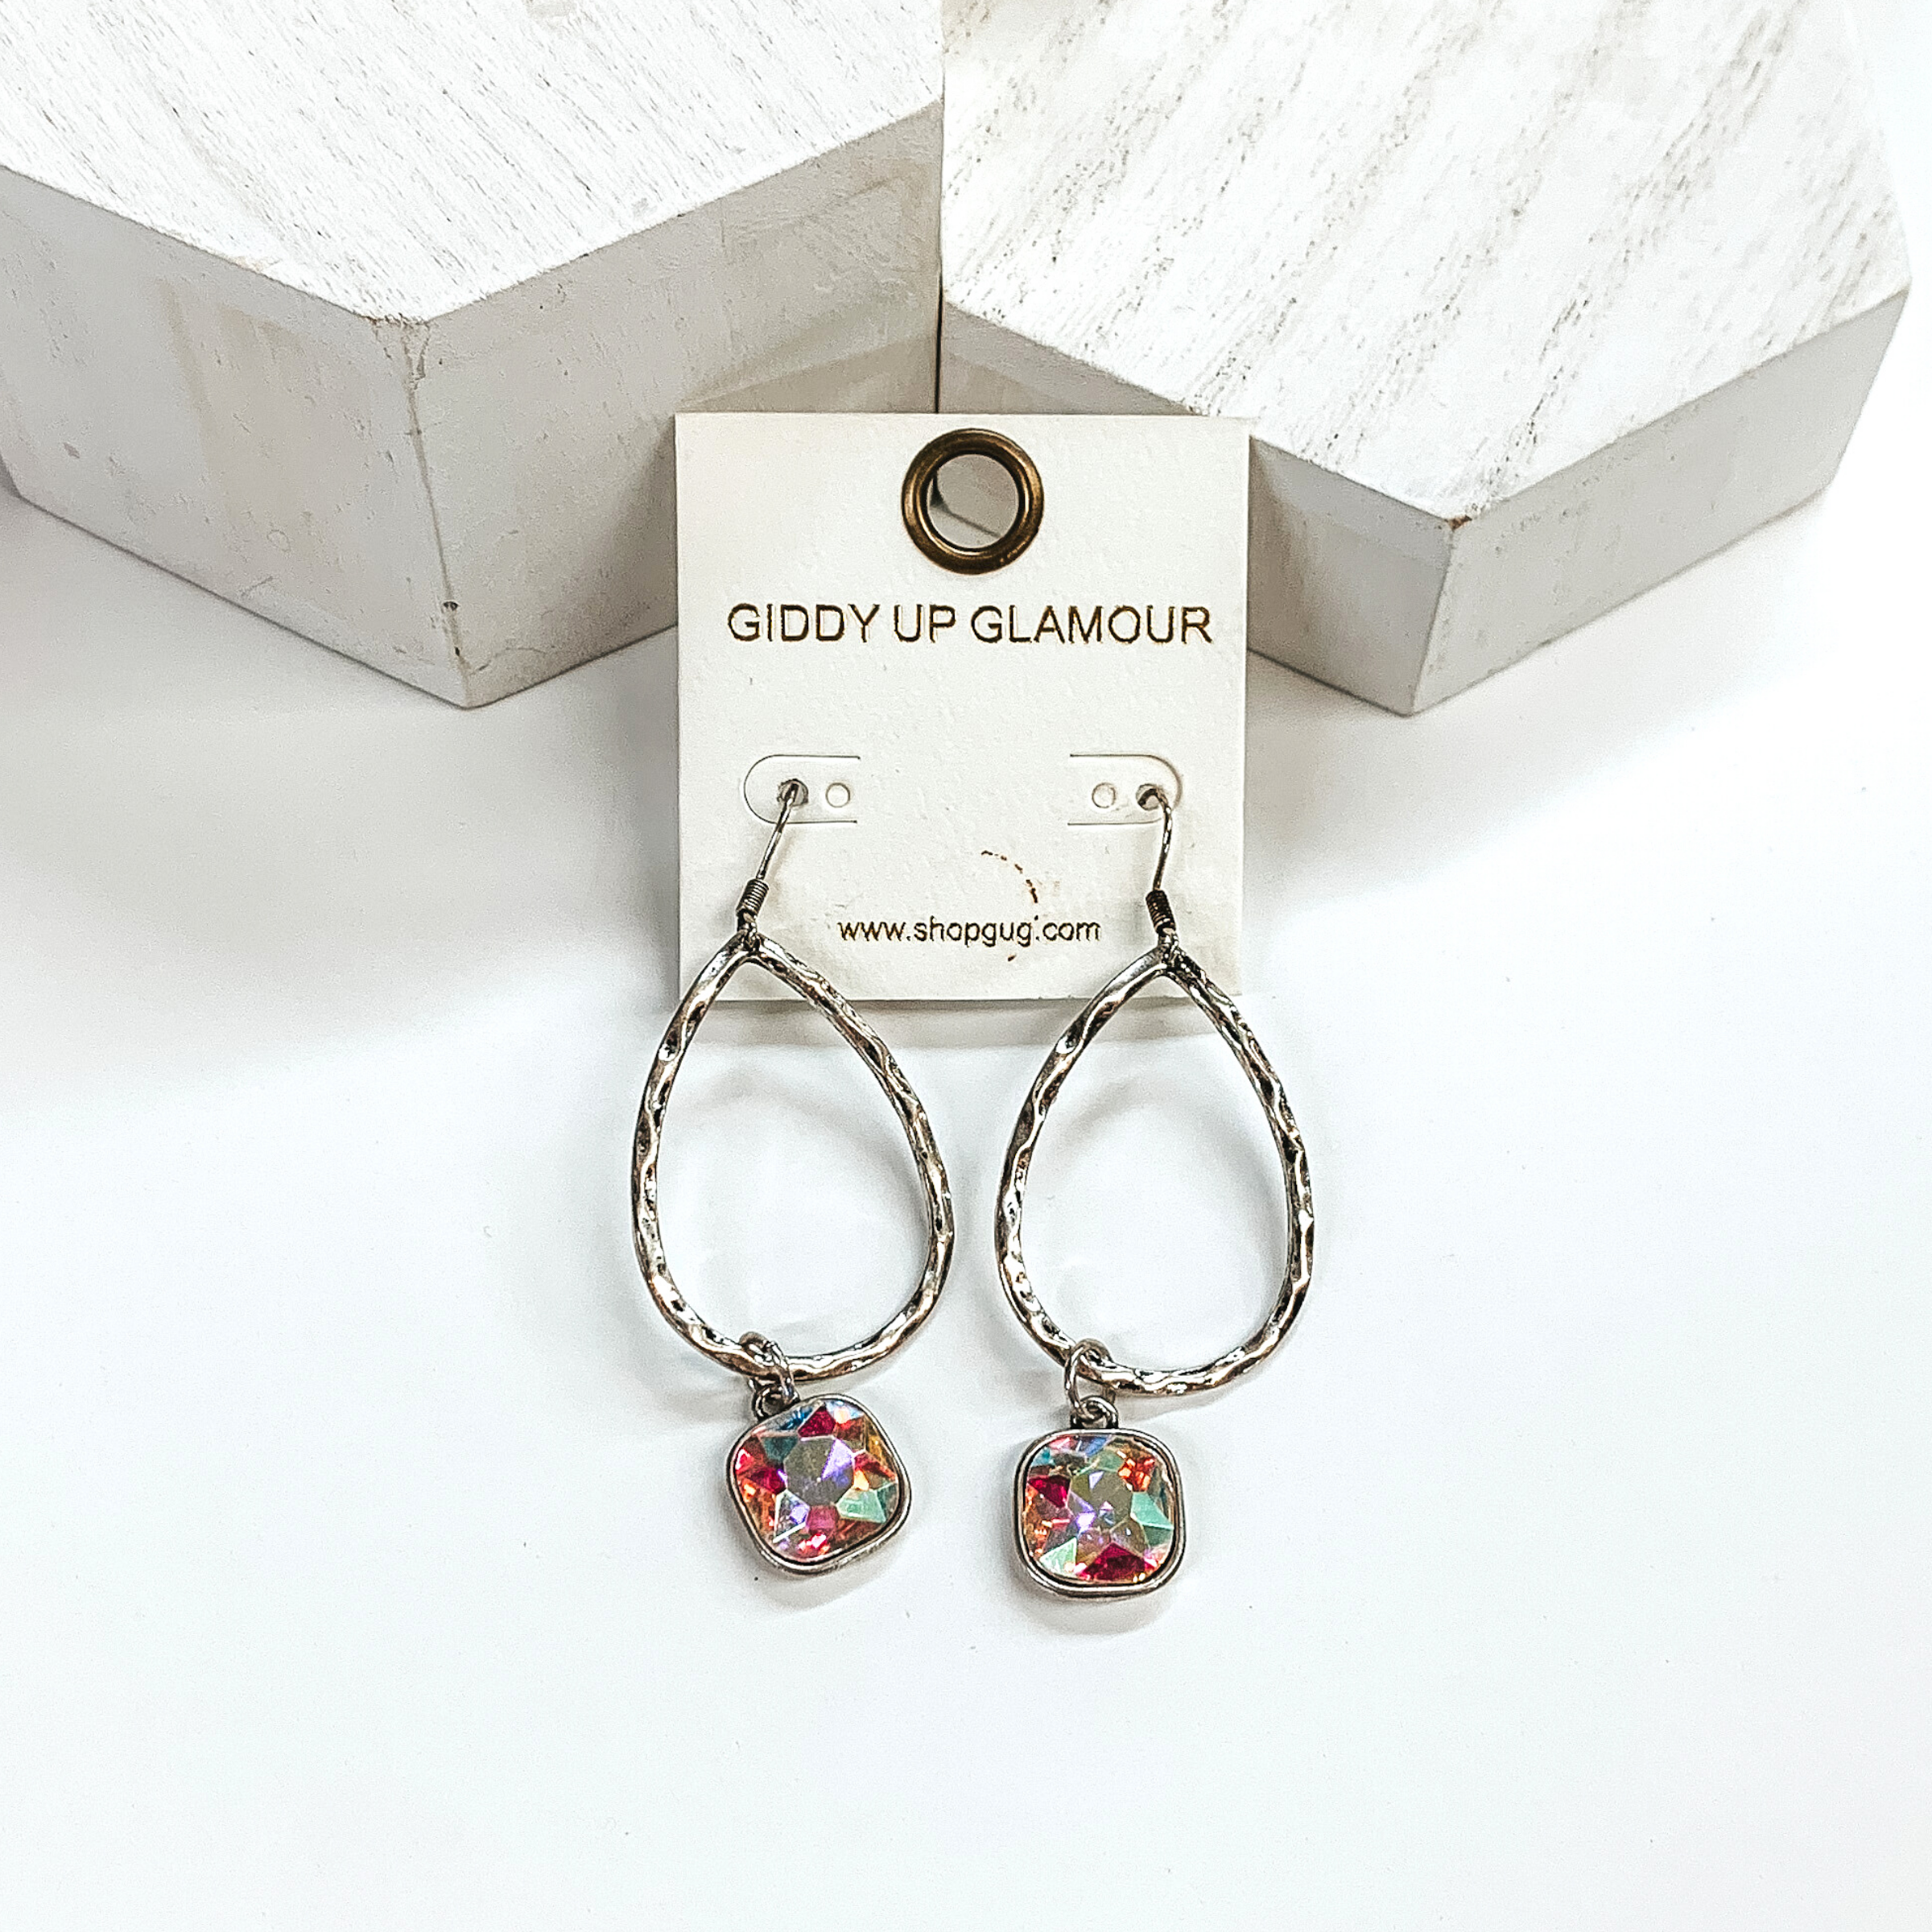 Silver teardrop hammered earrings with a hanging cushion cut ab crystal. These earrings are pictured on a white background with white blocks at the top of the picture. 